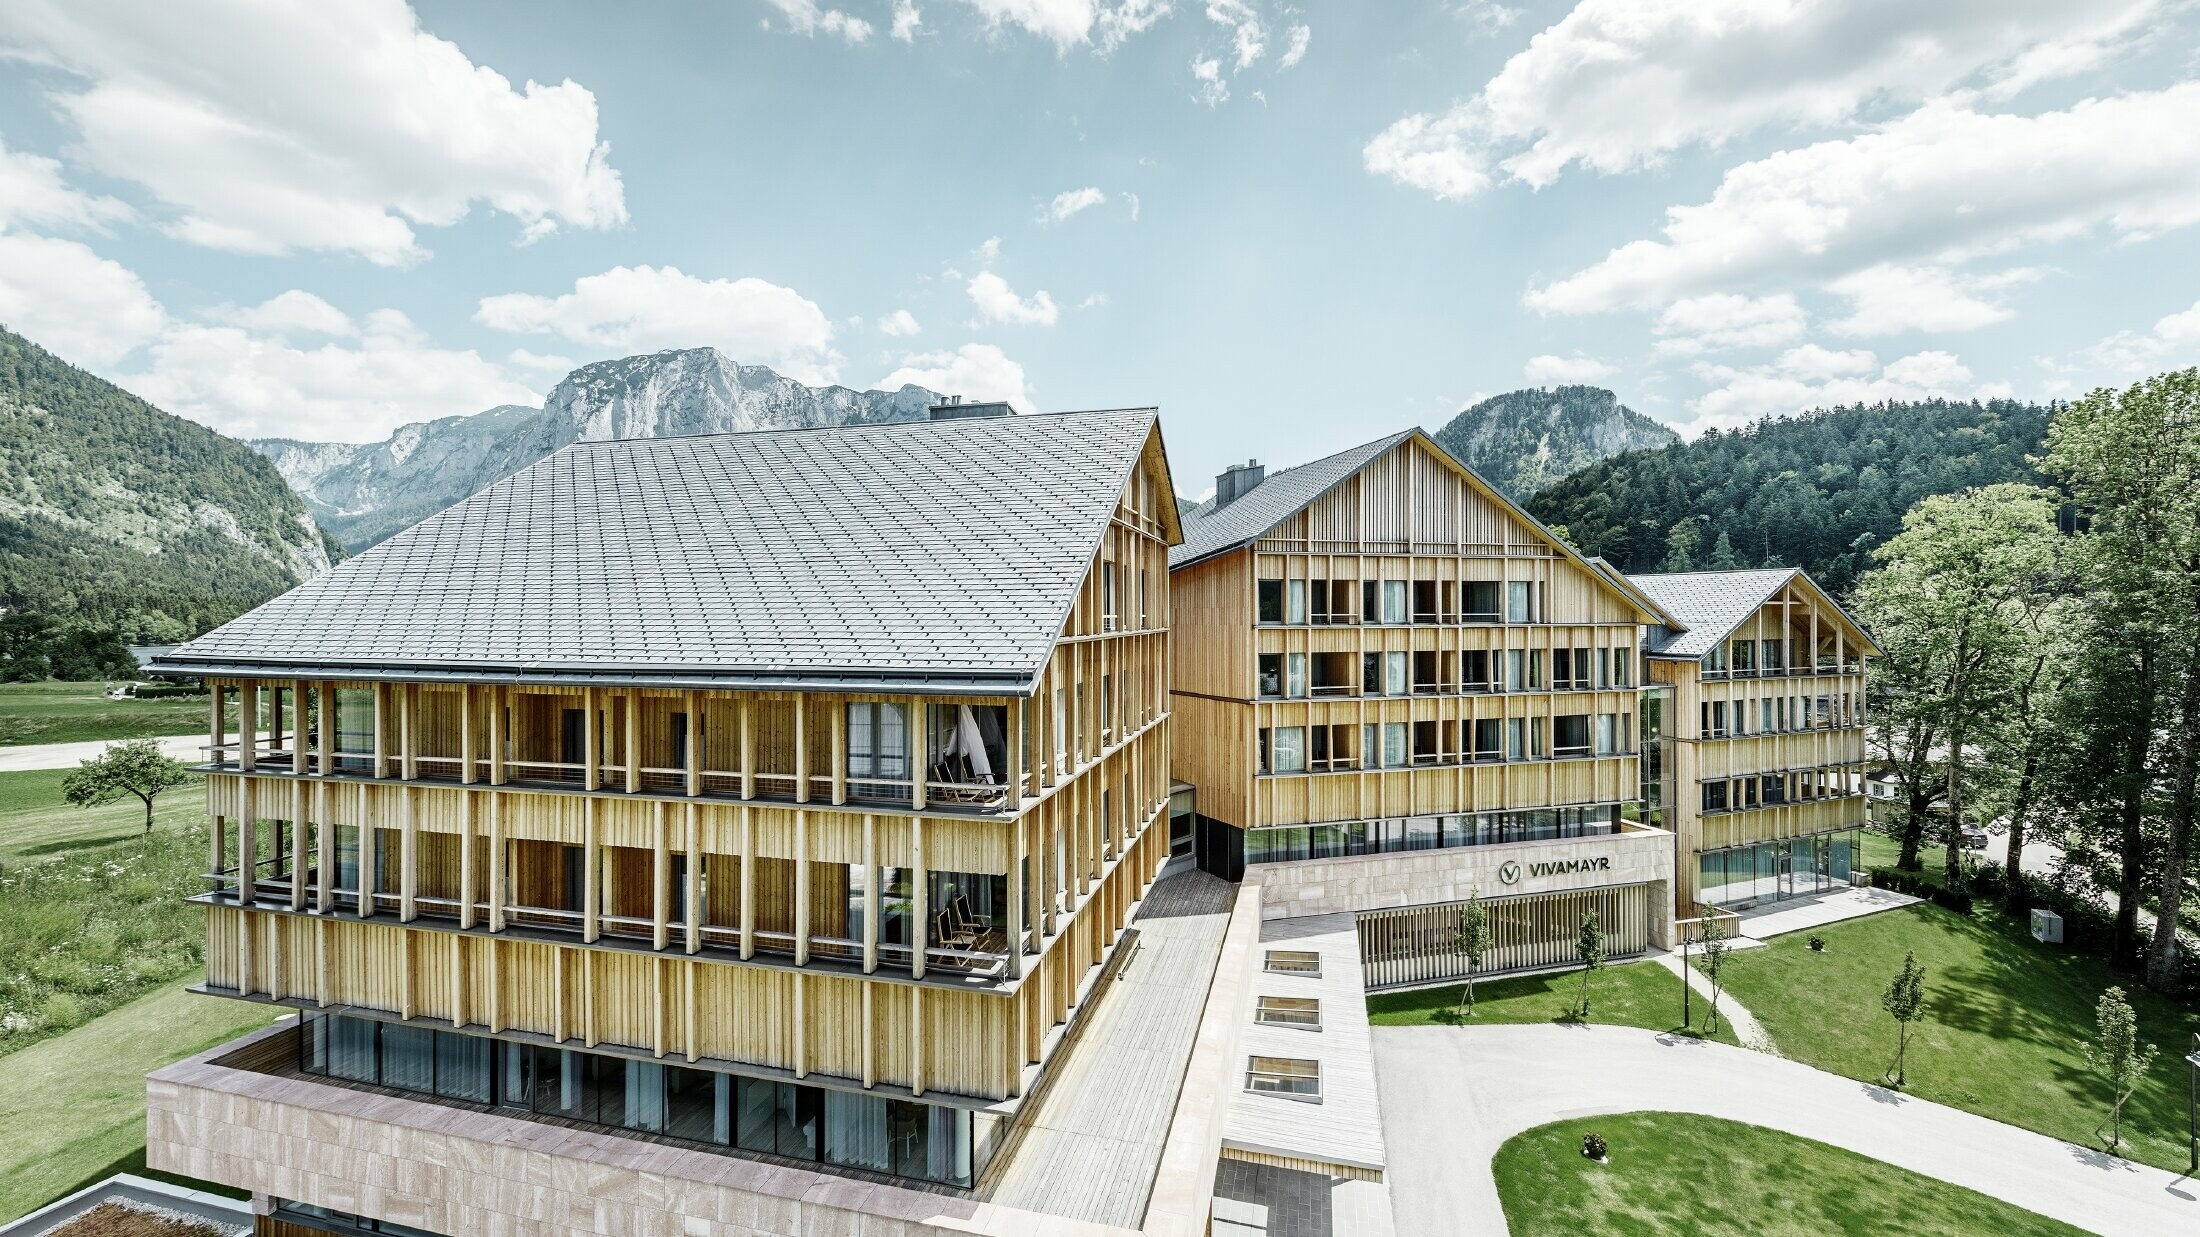 Hotel Vivamayr in Altaussee with wooden façade and PREFA roof with roof shingles